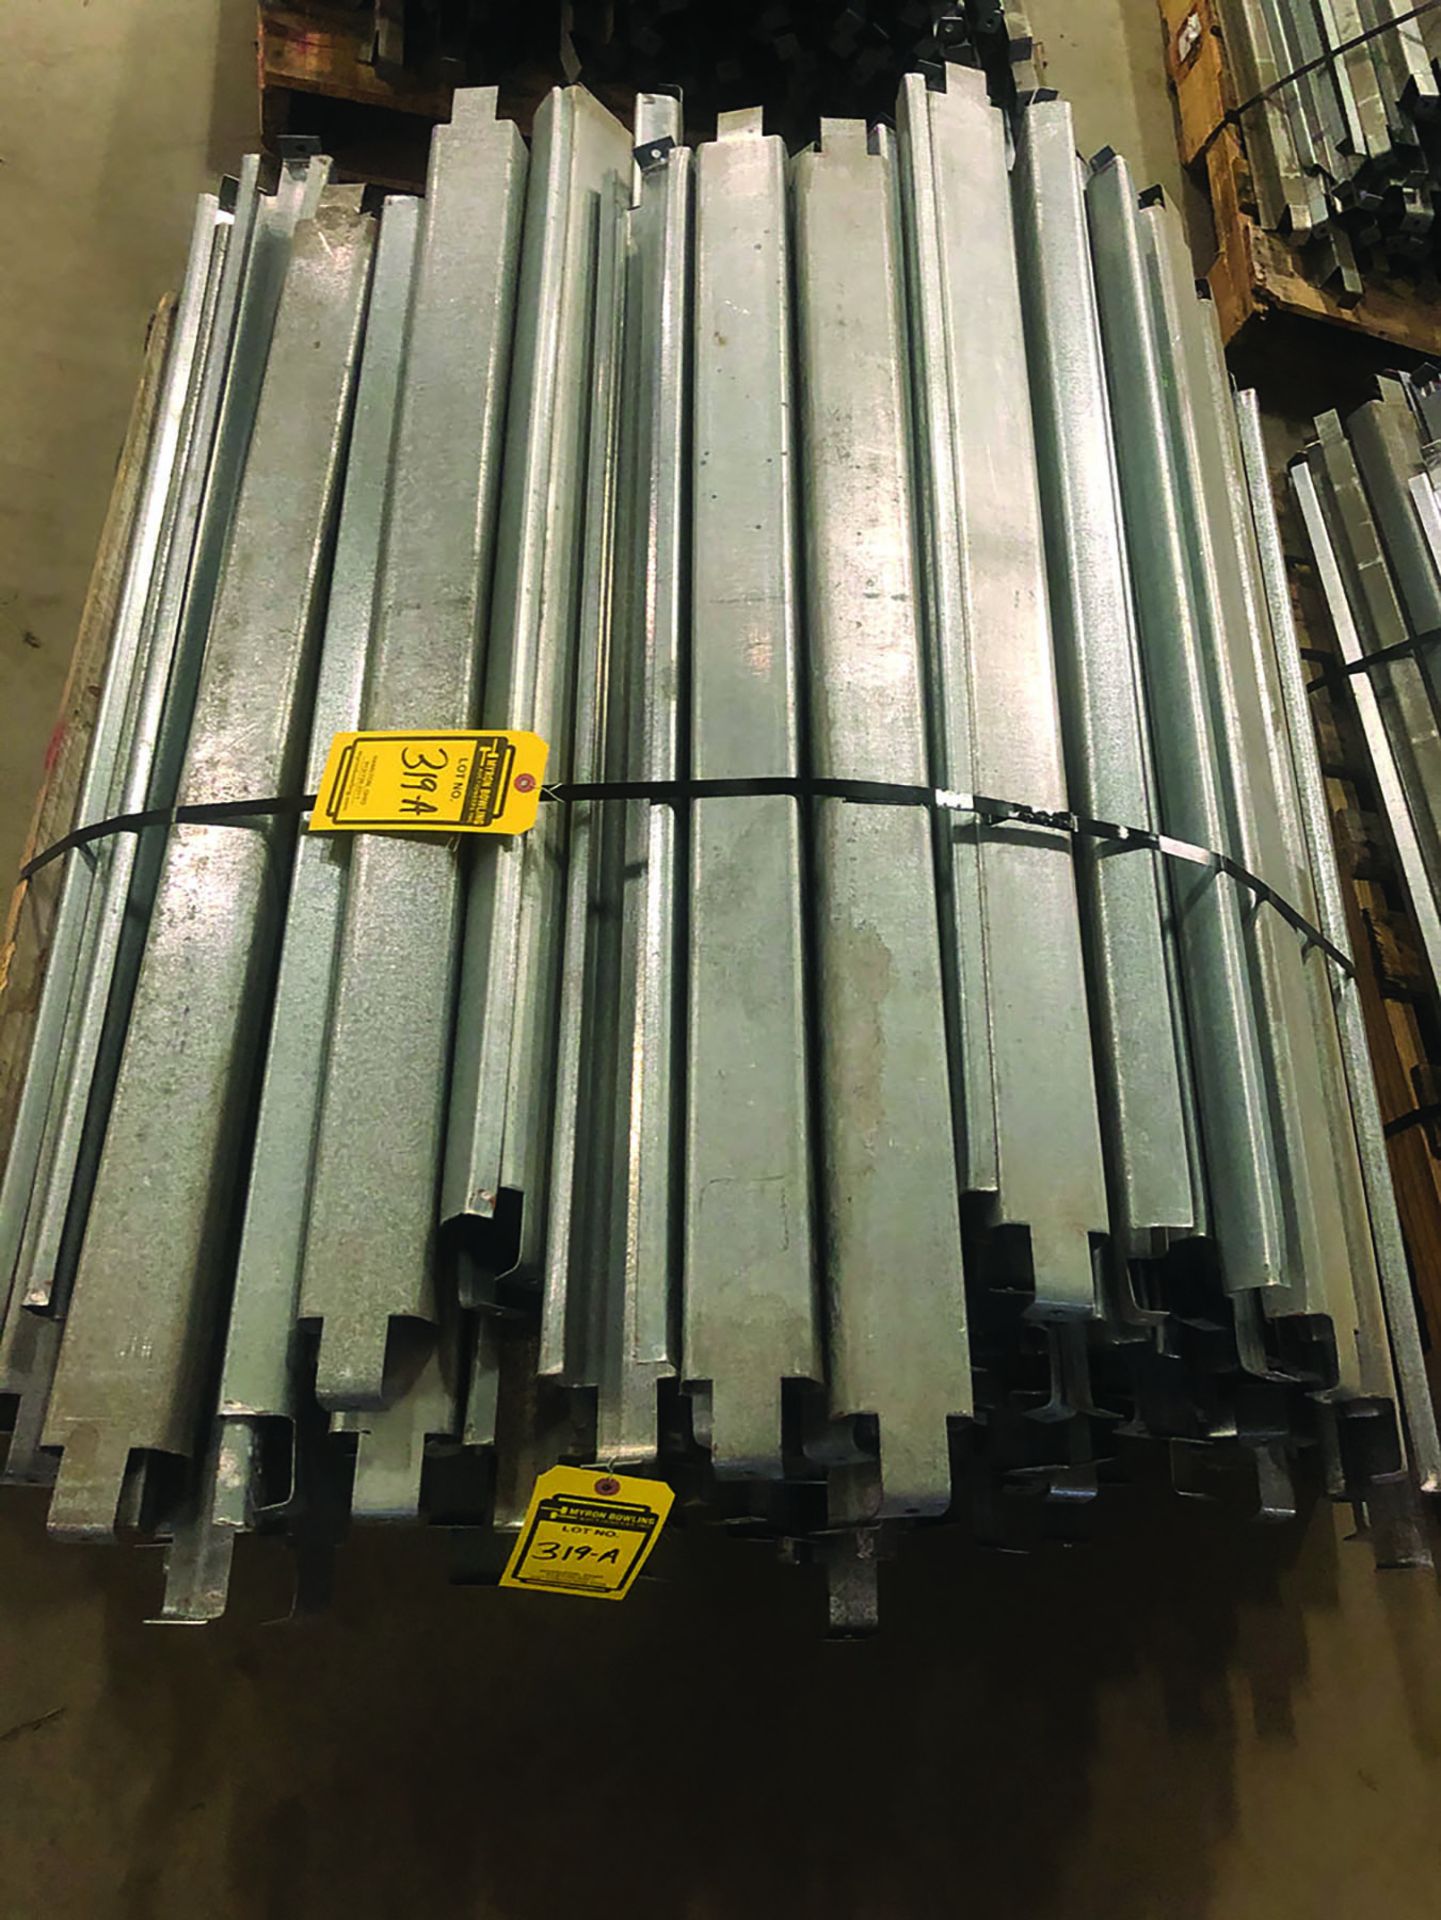 SKID OF FLANGED PALLET SUPPORTS - Image 2 of 2